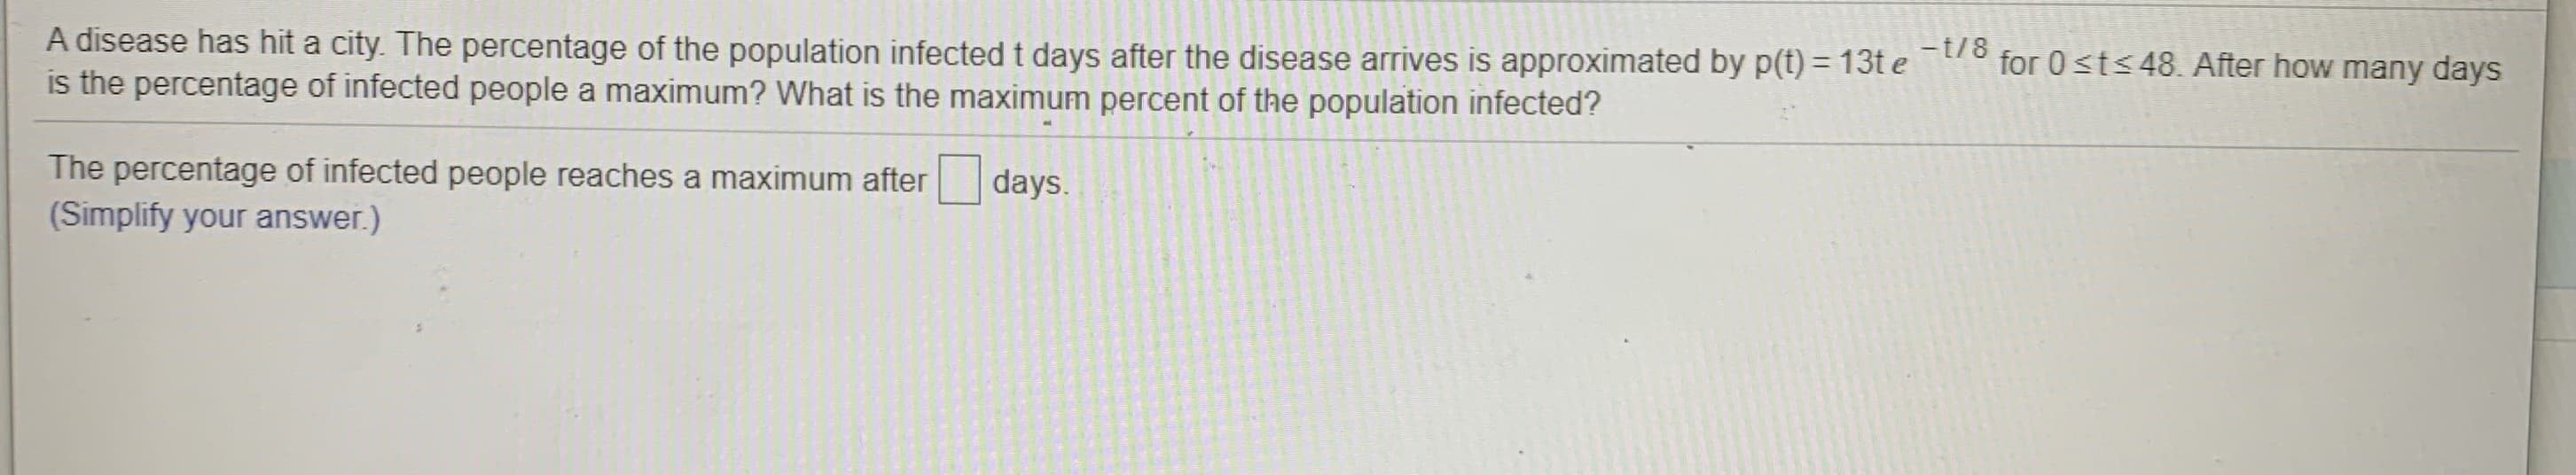 A disease has hit a city. The percentage of the population infected t days after the disease arrives is approximated by p(t) = 13t e ° for 0 sts48. After how many days
is the percentage of infected people a maximum? What is the maximum percent of the population infected?
-t/8
The percentage of infected people reaches a maximum after
(Simplify your answer.)
days.
